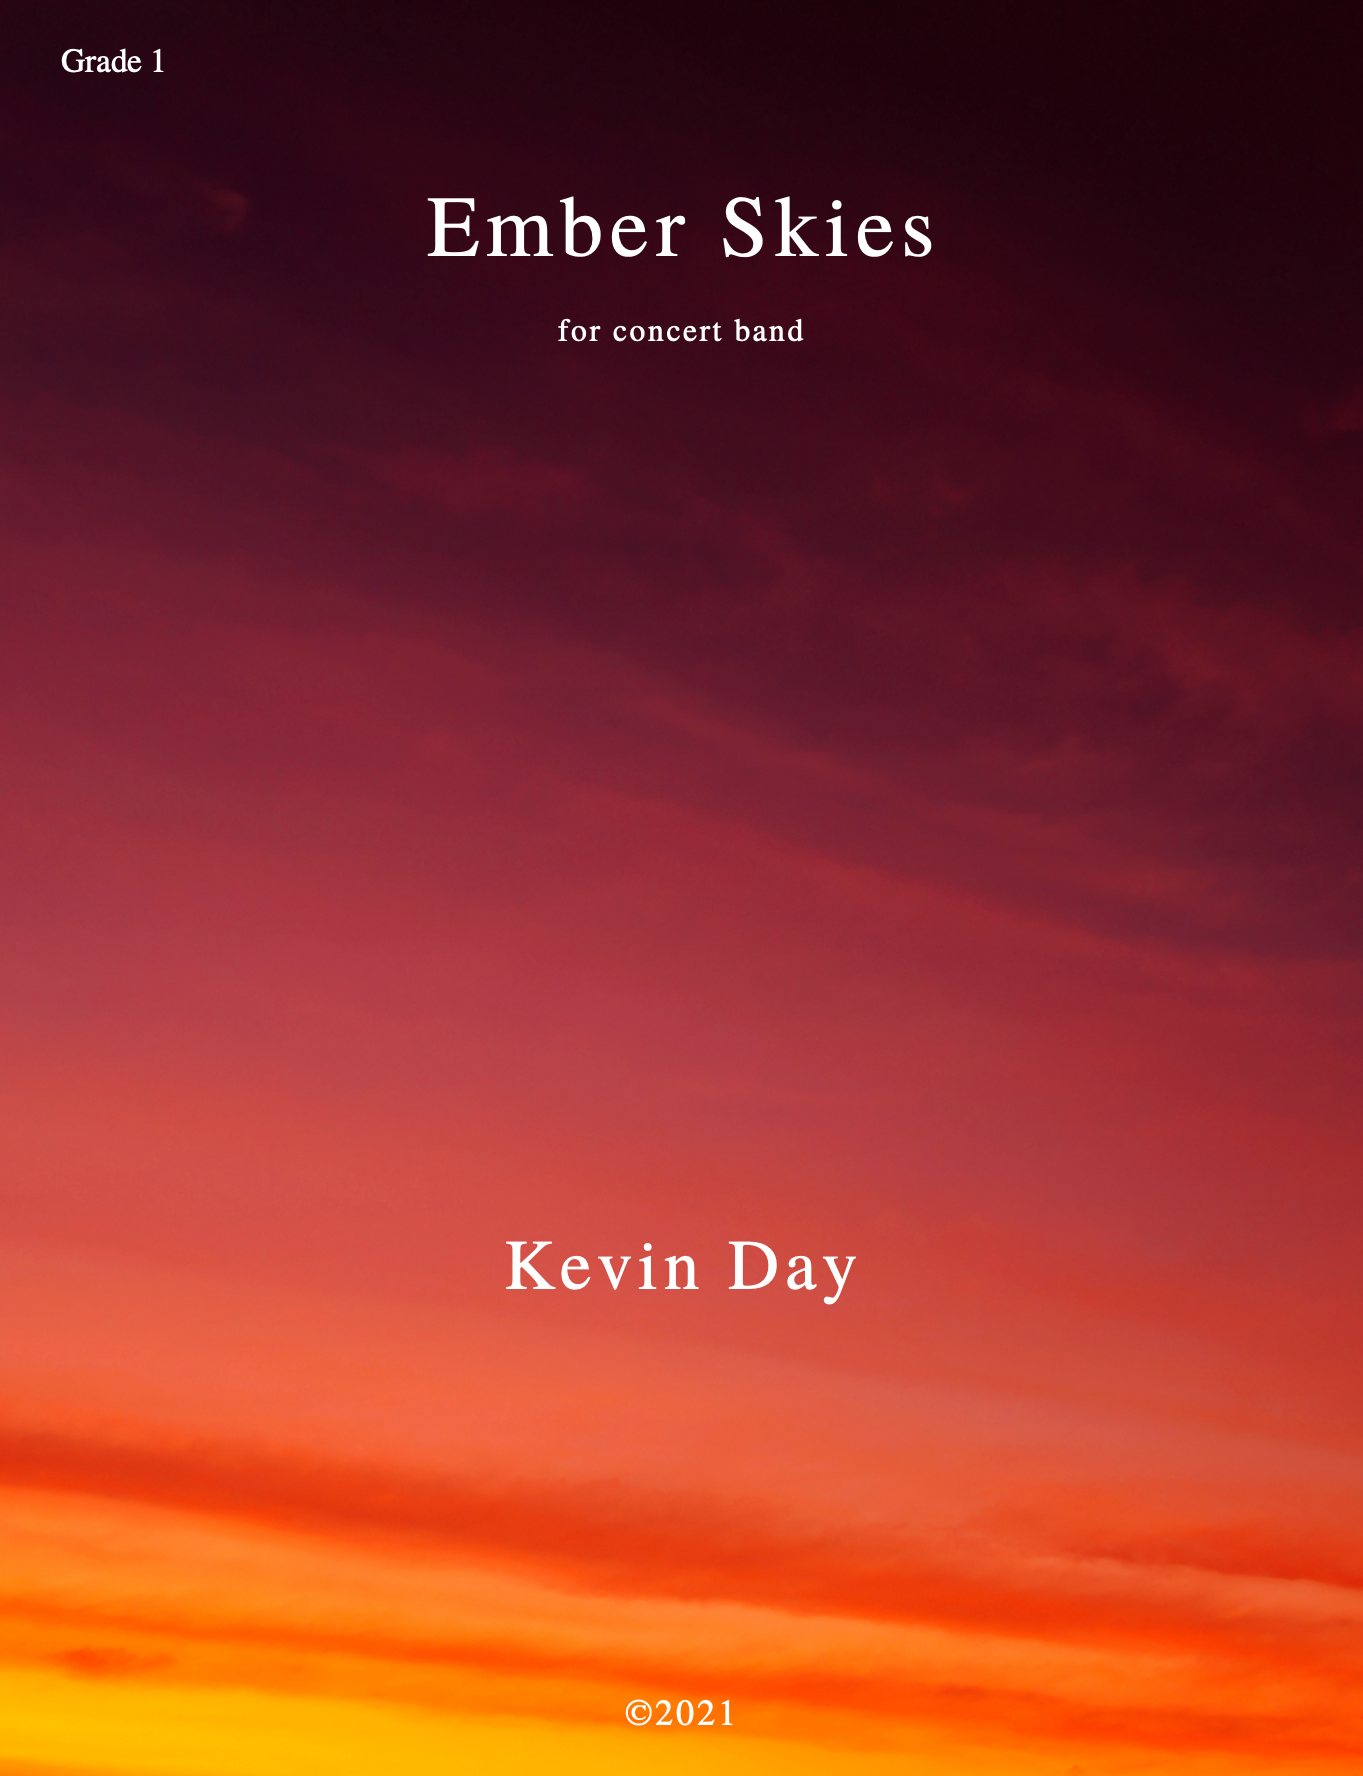 Ember Skies (Score Only) by Kevin Day